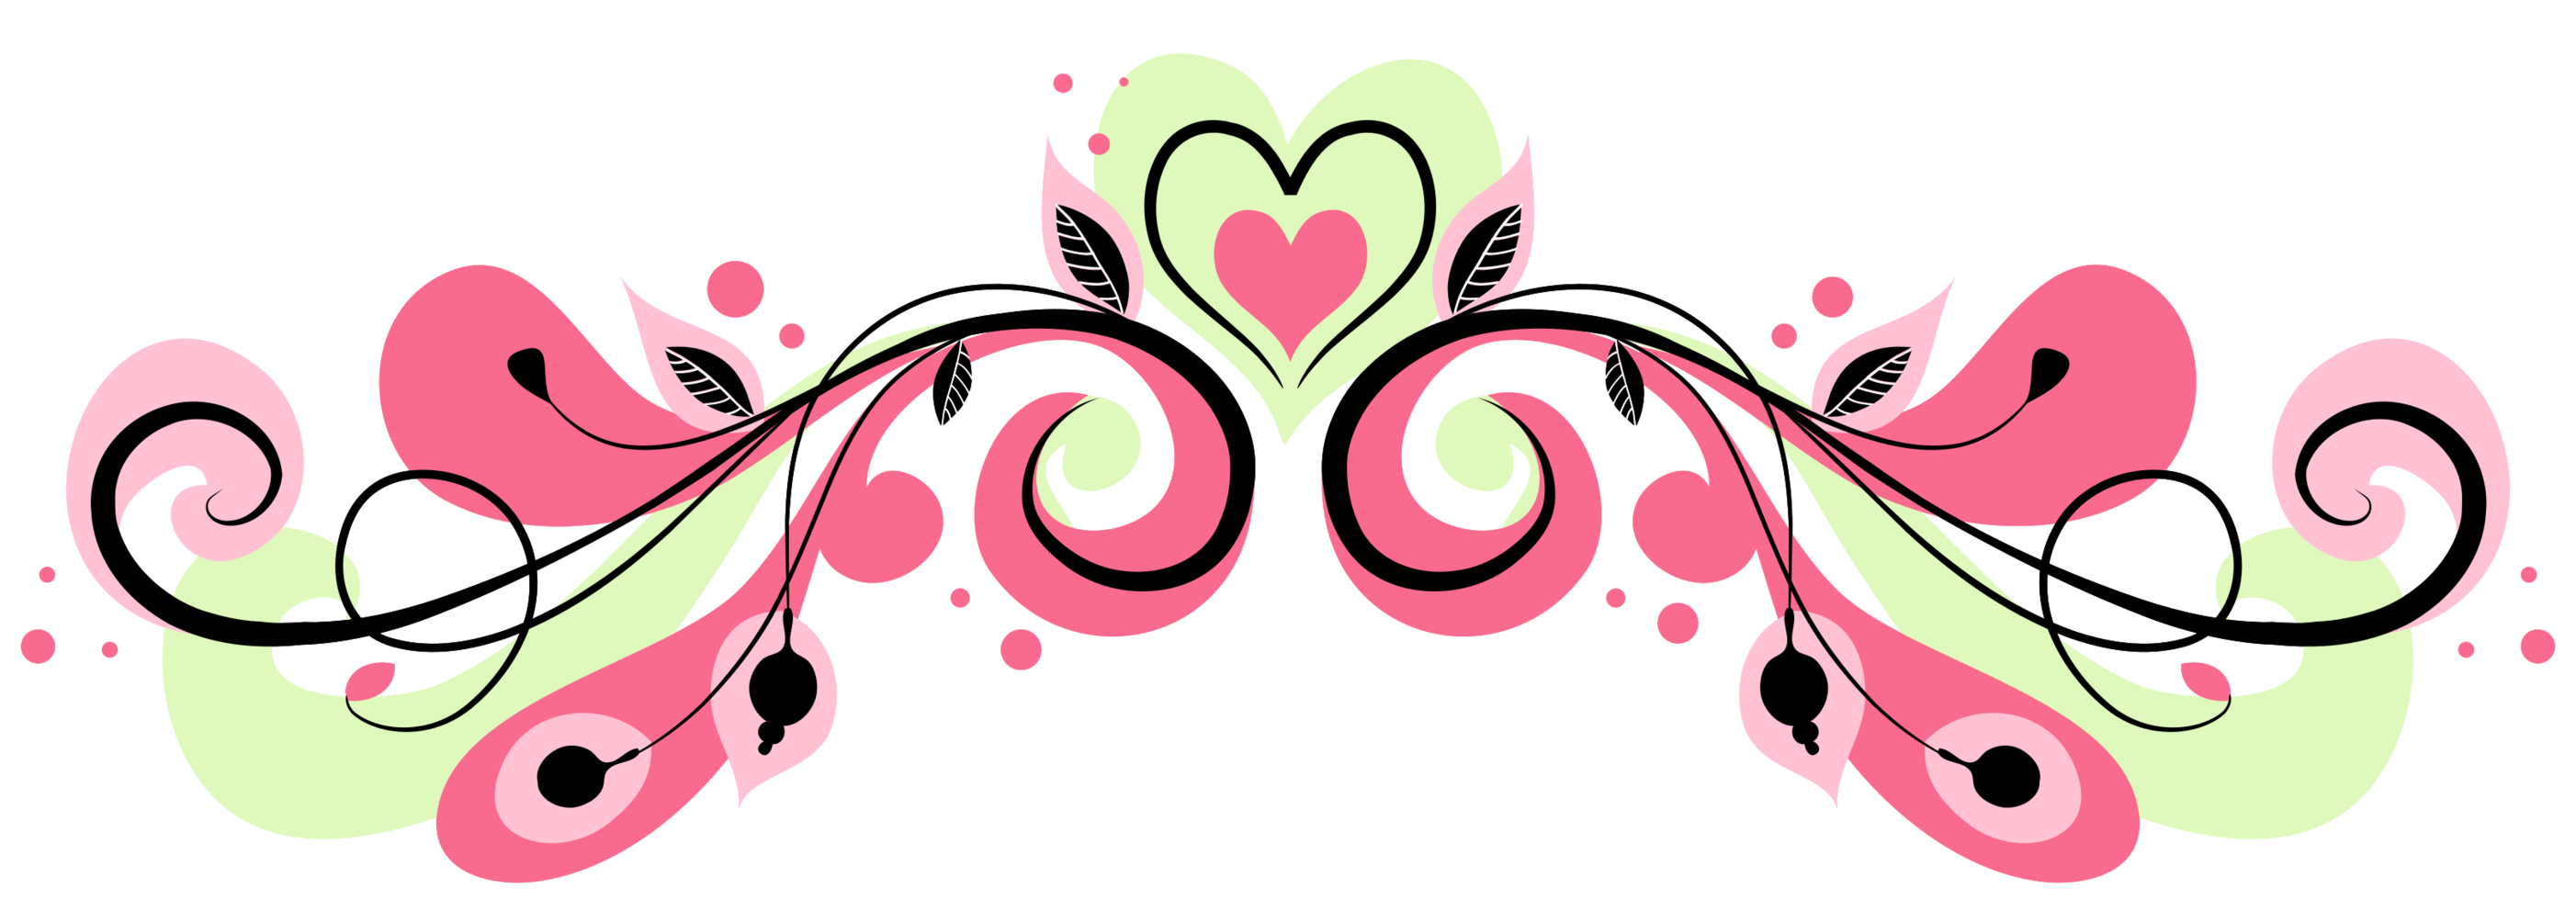 Heart decoration png